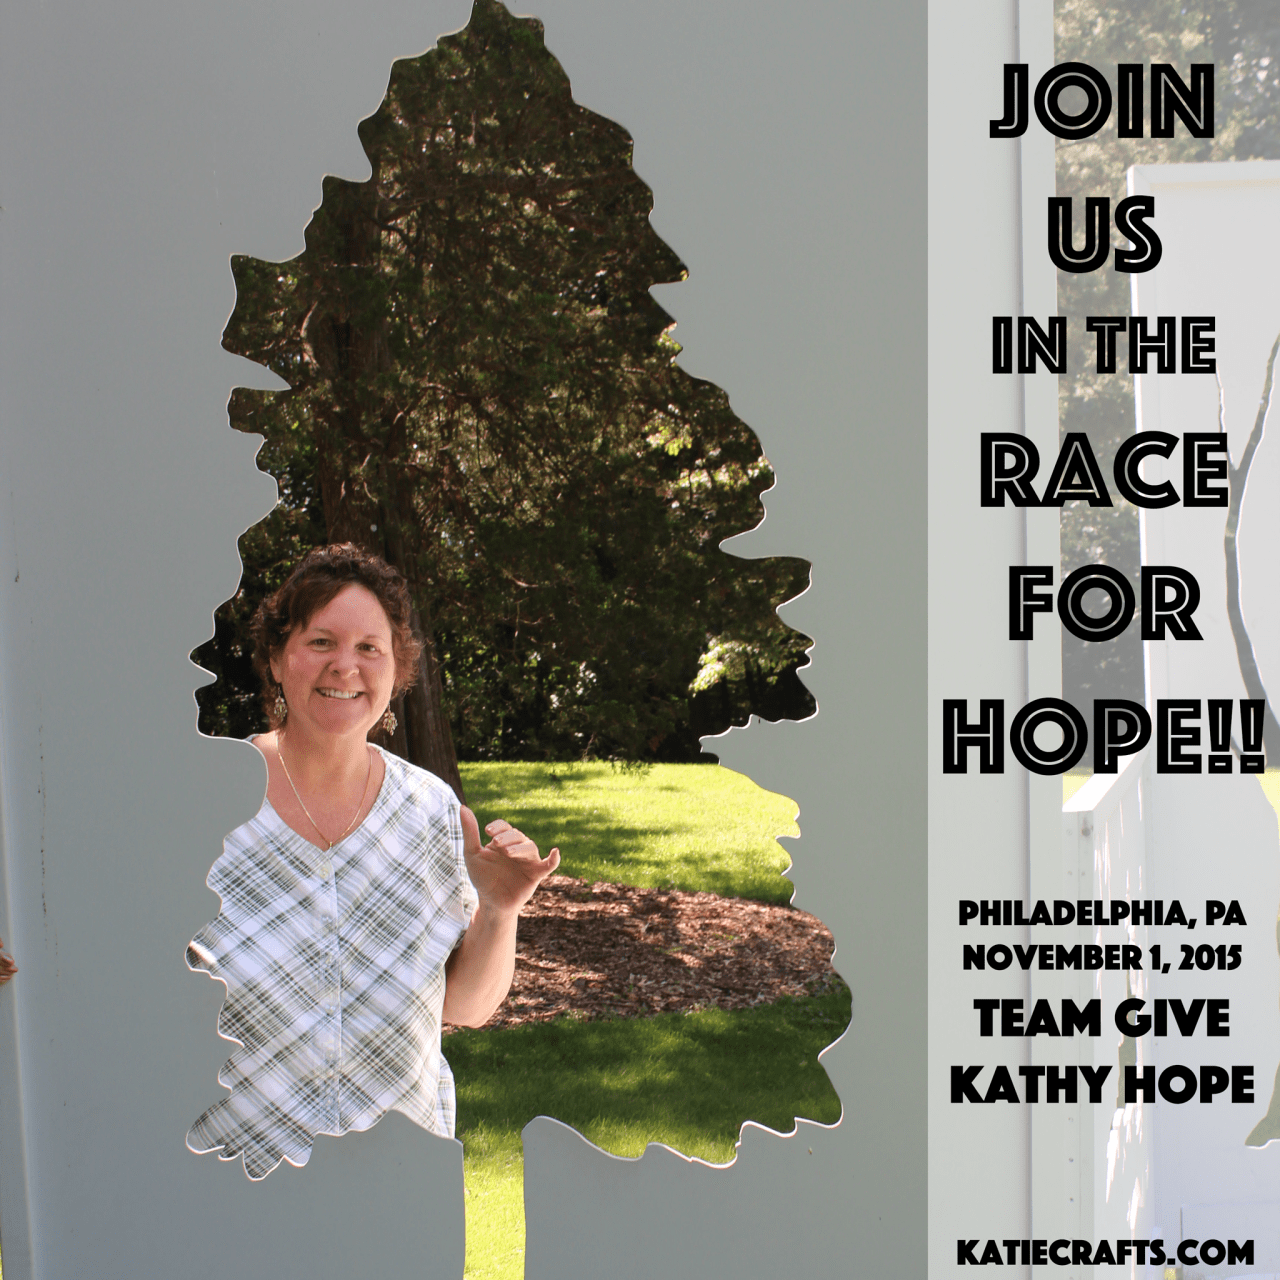 Join Us in the Race For Hope!! on Katie Crafts; https://www.katiecrafts.com